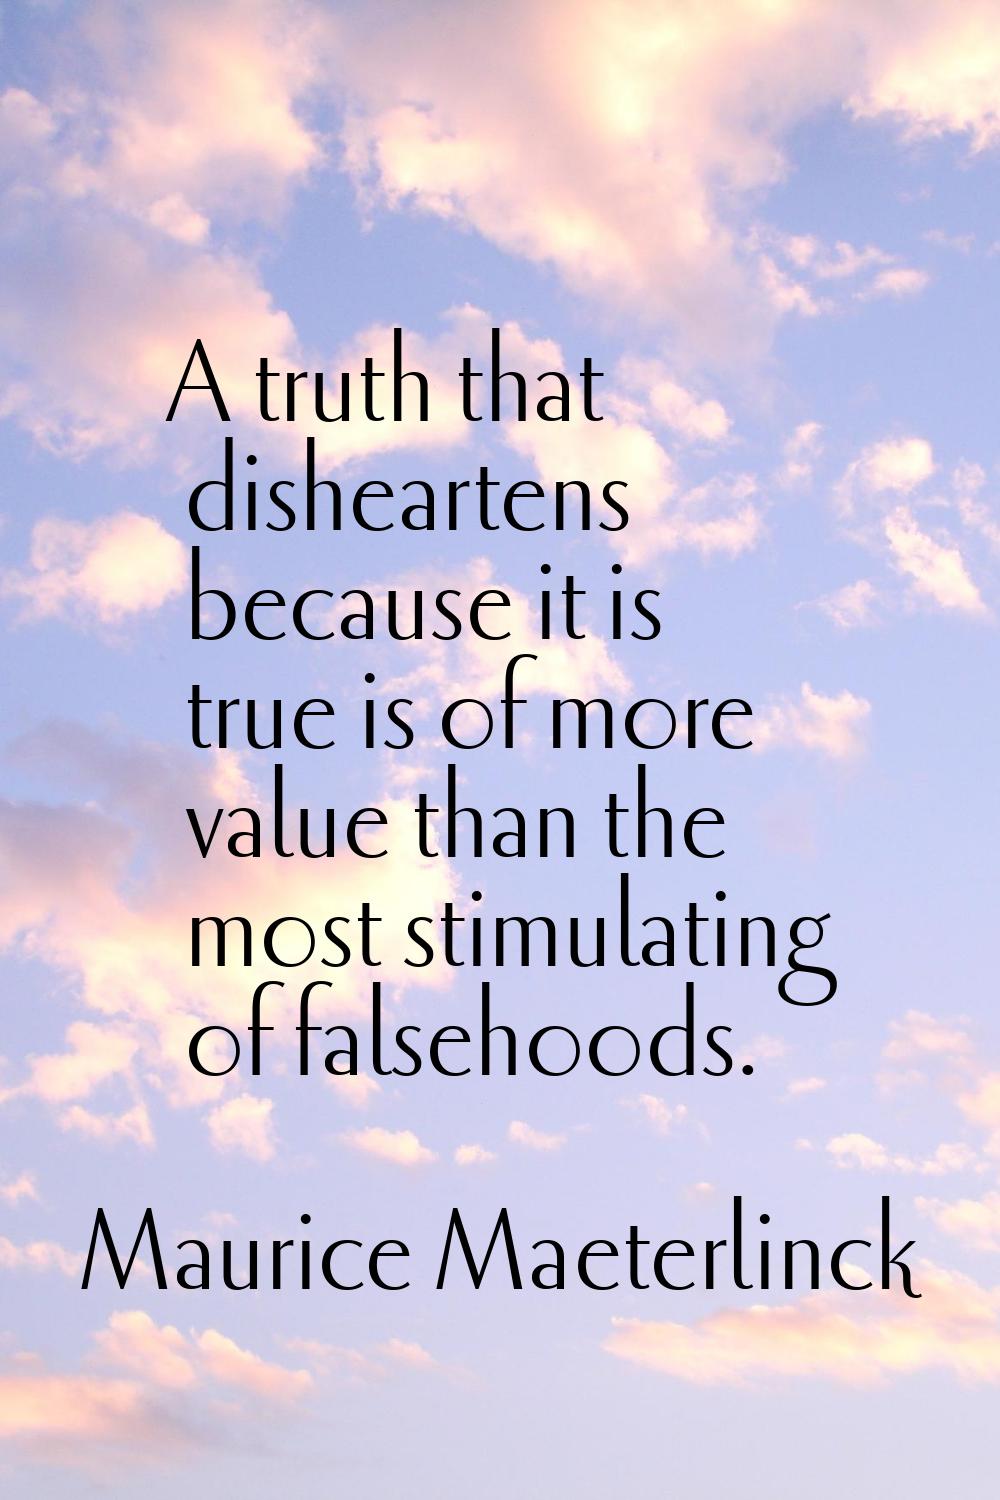 A truth that disheartens because it is true is of more value than the most stimulating of falsehood